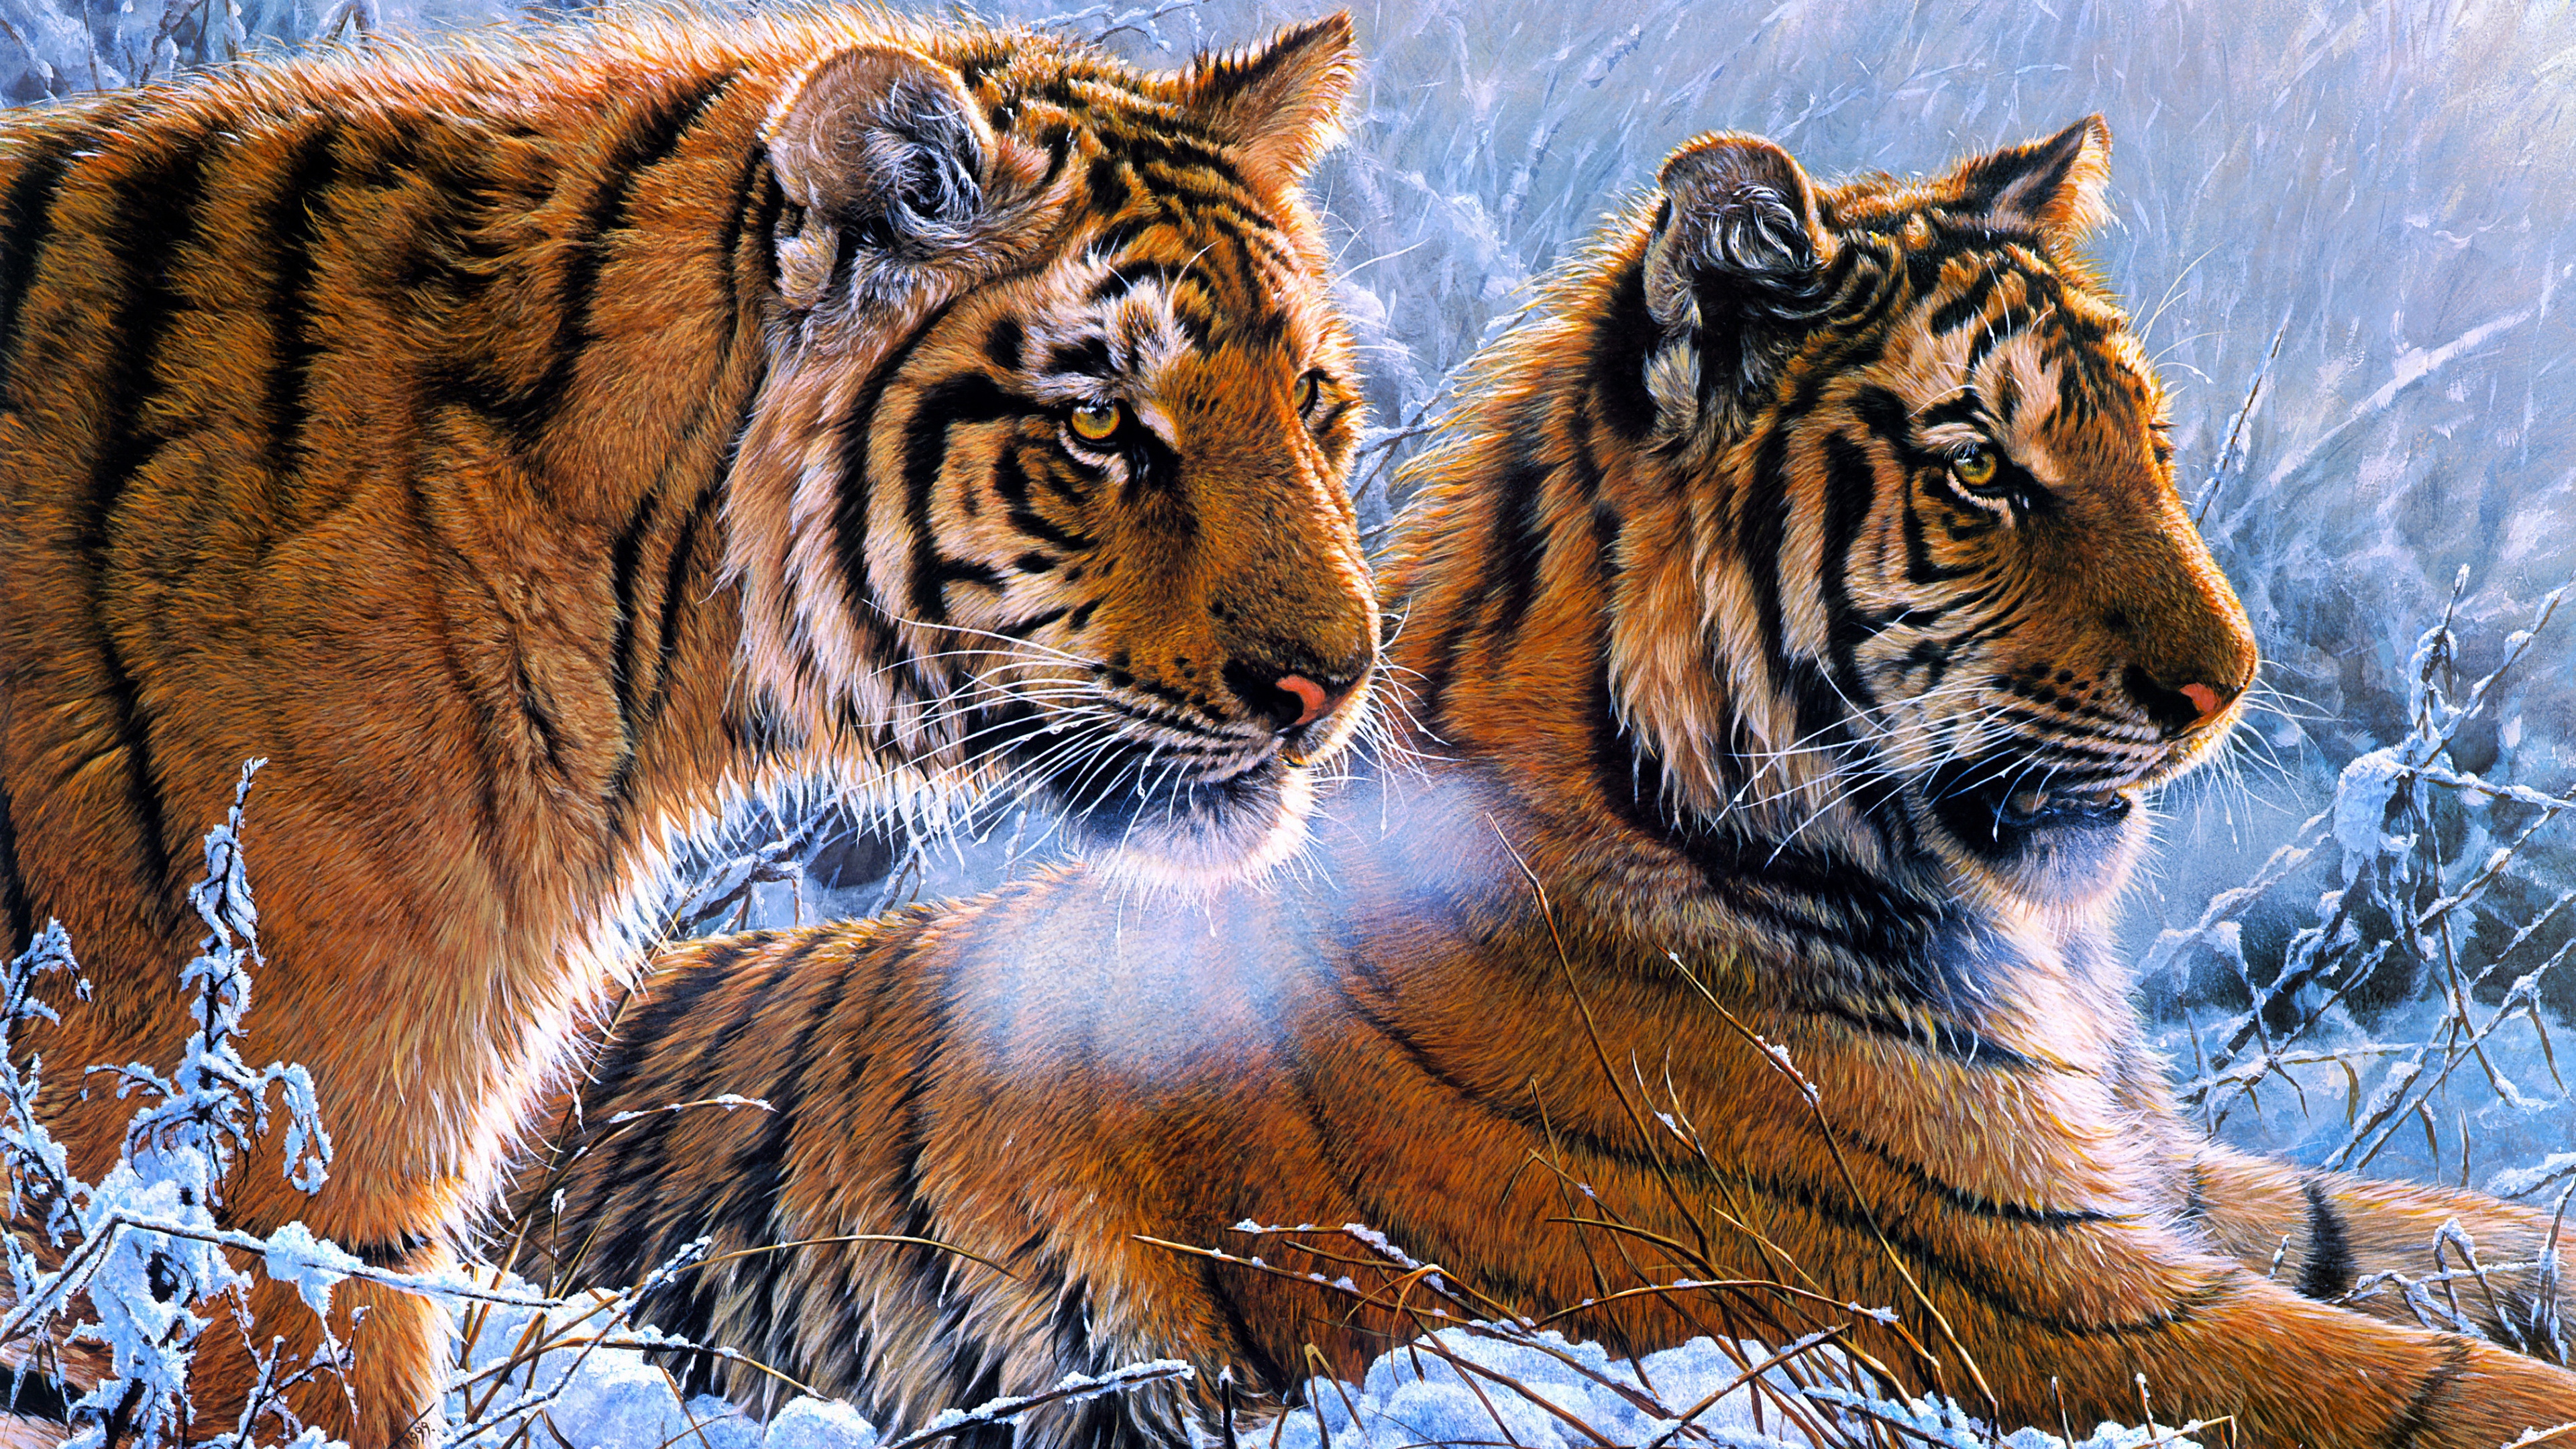 Cute Tiger Wallpaper 56 pictures